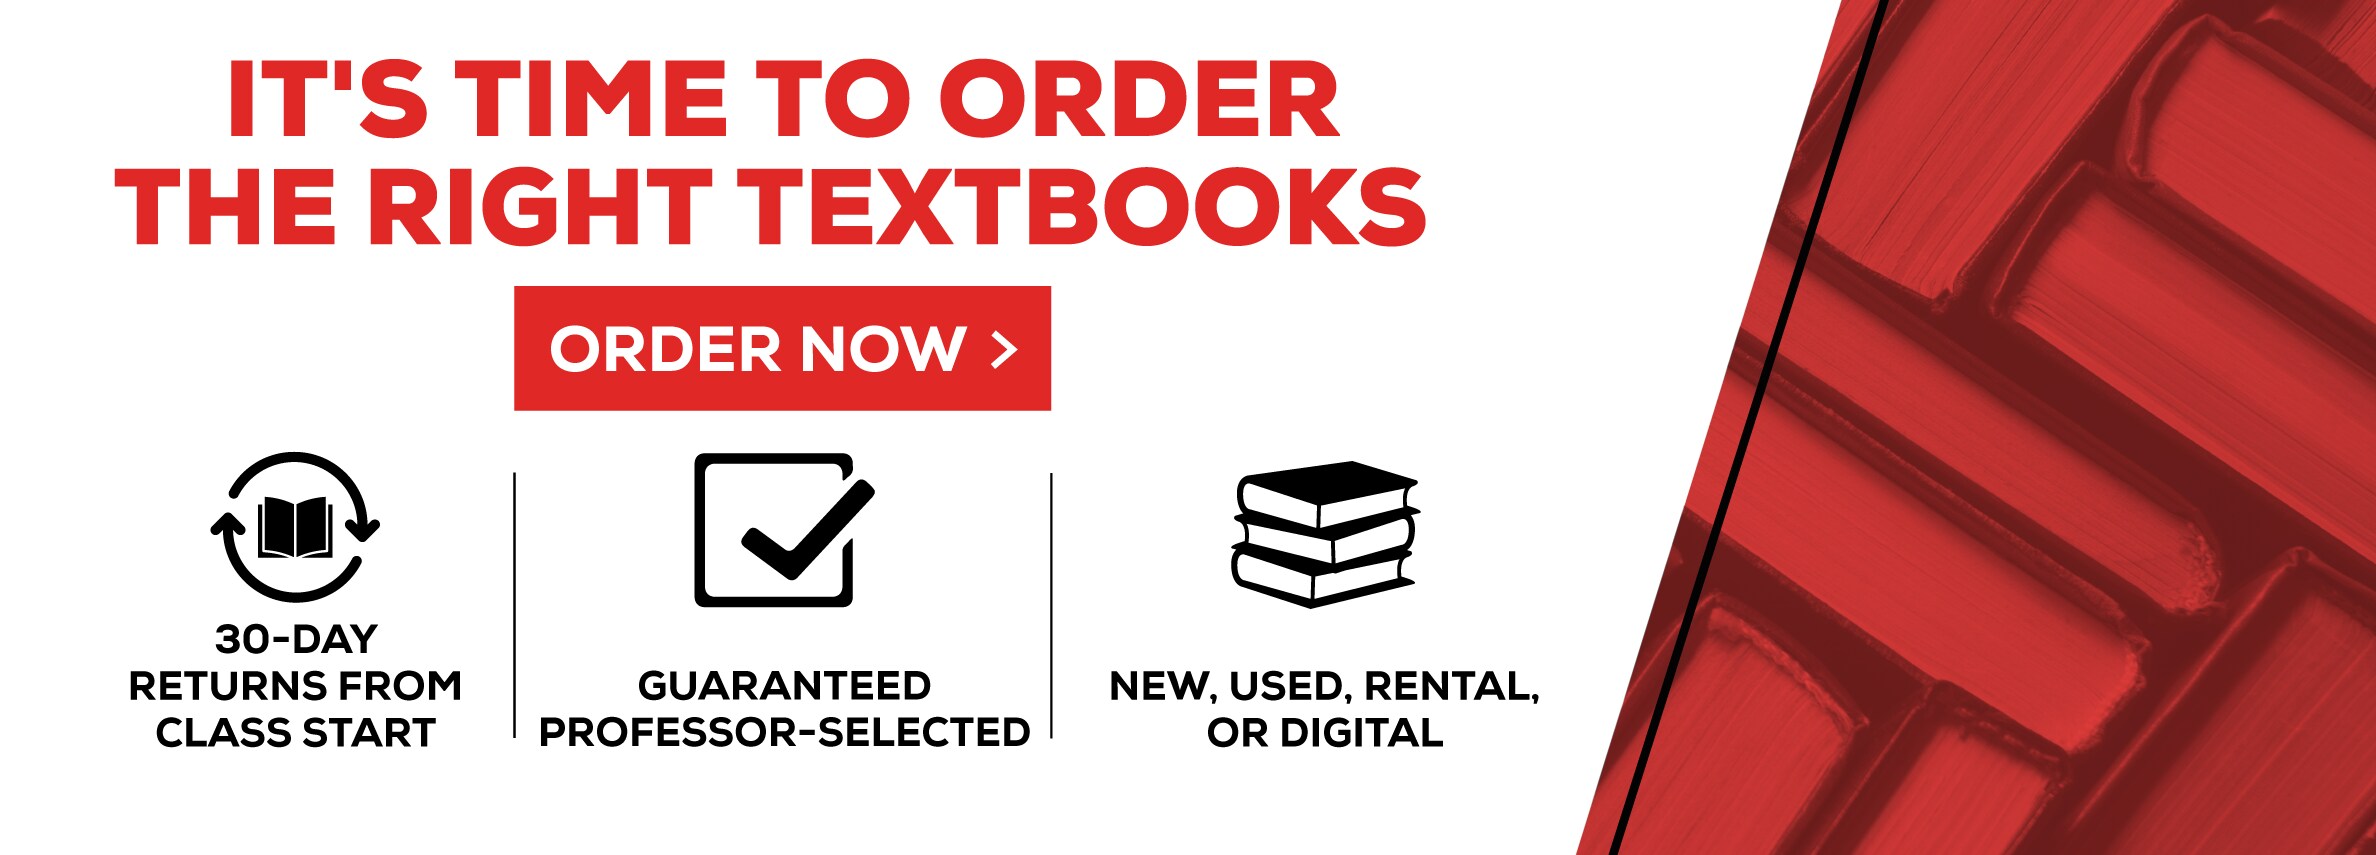 ItÃ¢â‚¬â„¢s time to order the right textbooks. Order now. 30-day returns from class start. Guaranteed professor-selected. New, Used, rental, or digital.